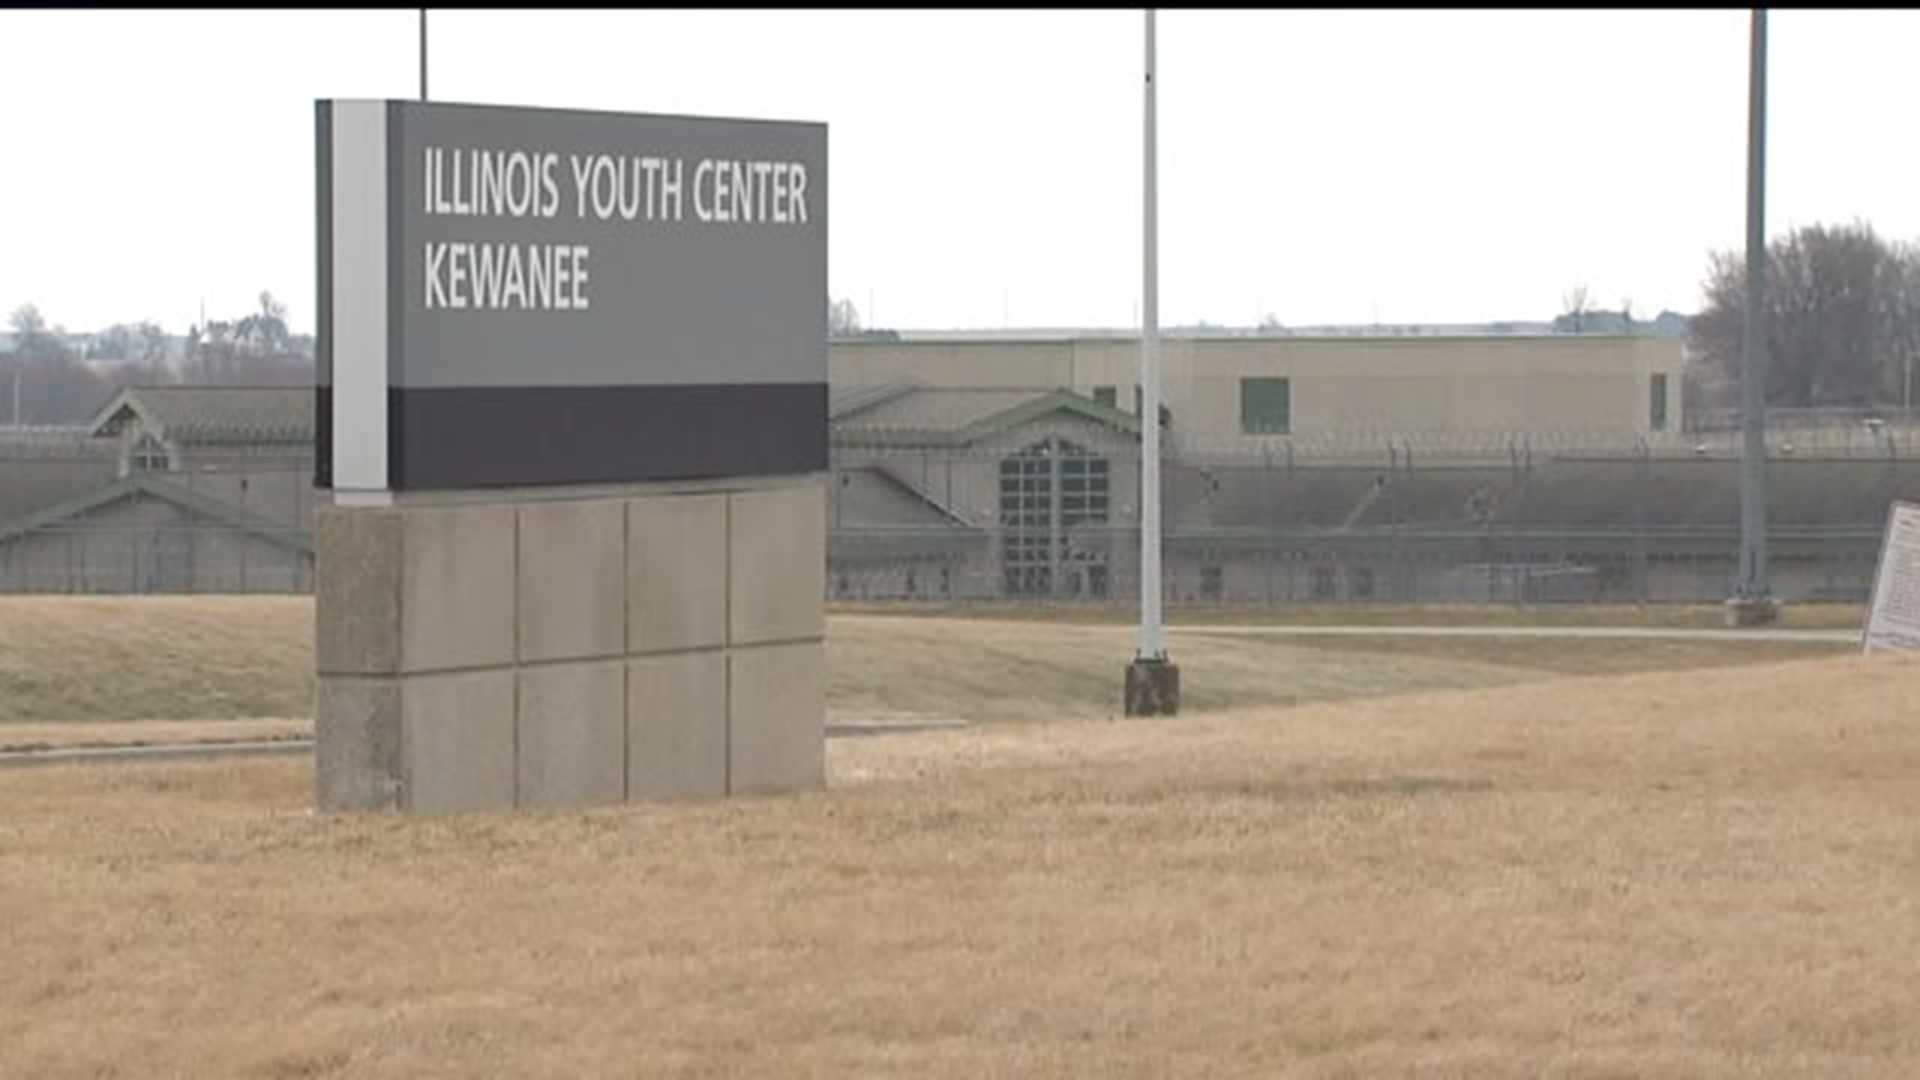 Illinois Department of Juvenile Justice investigating youth center in Kewanee